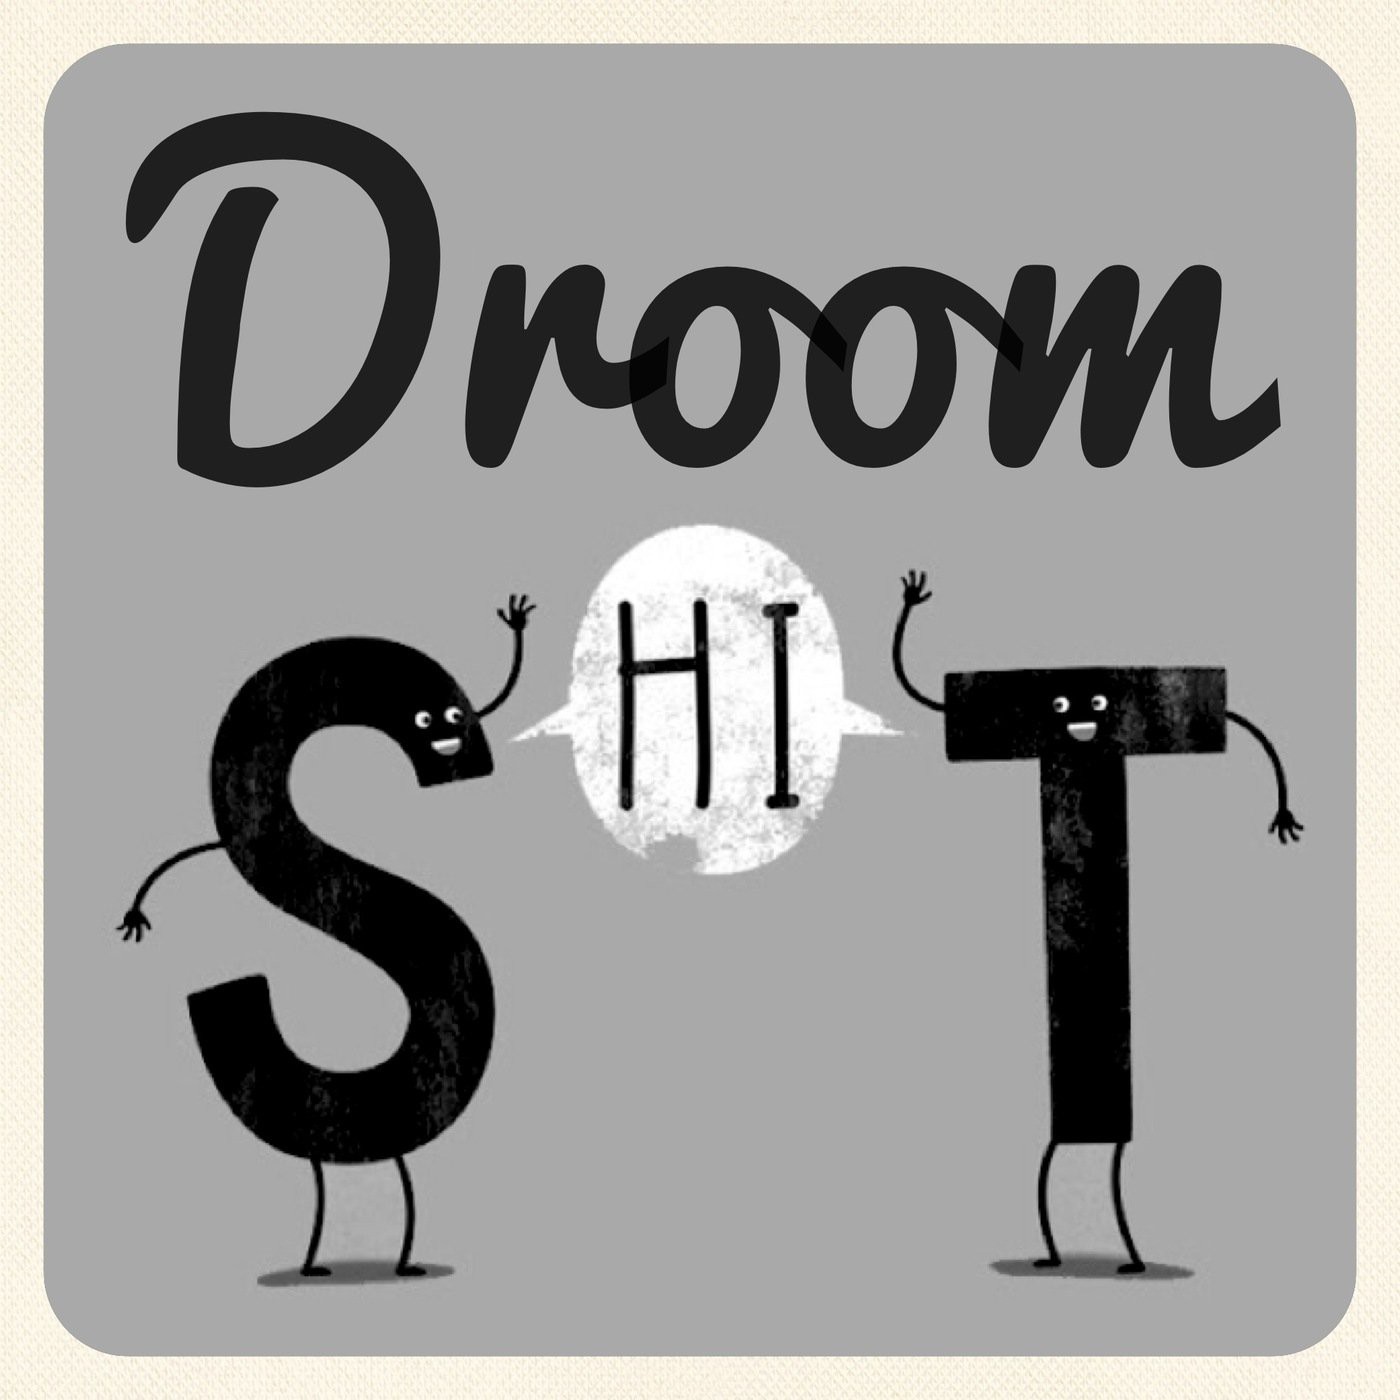 Droom Episode 003 "Make Some Noise Show"